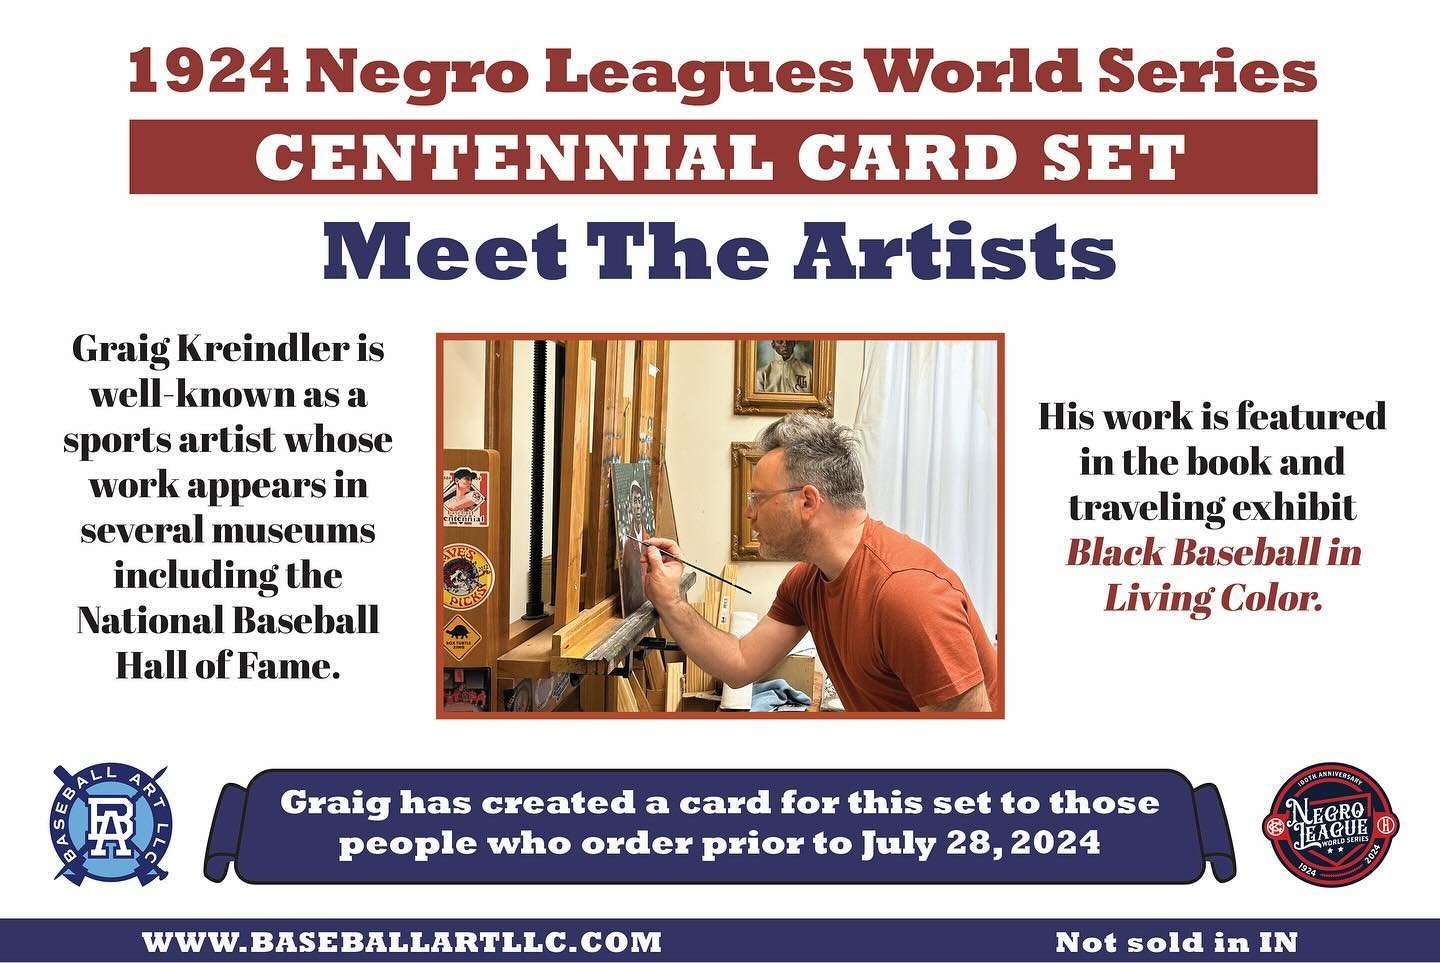 Thrilled to be a part of this project, celebrating the centennial of the first Negro League World Series. This card set features art from some of my favorite people, and my contribution is guaranteed to anyone pre-ordering through Kickstarter. Link i